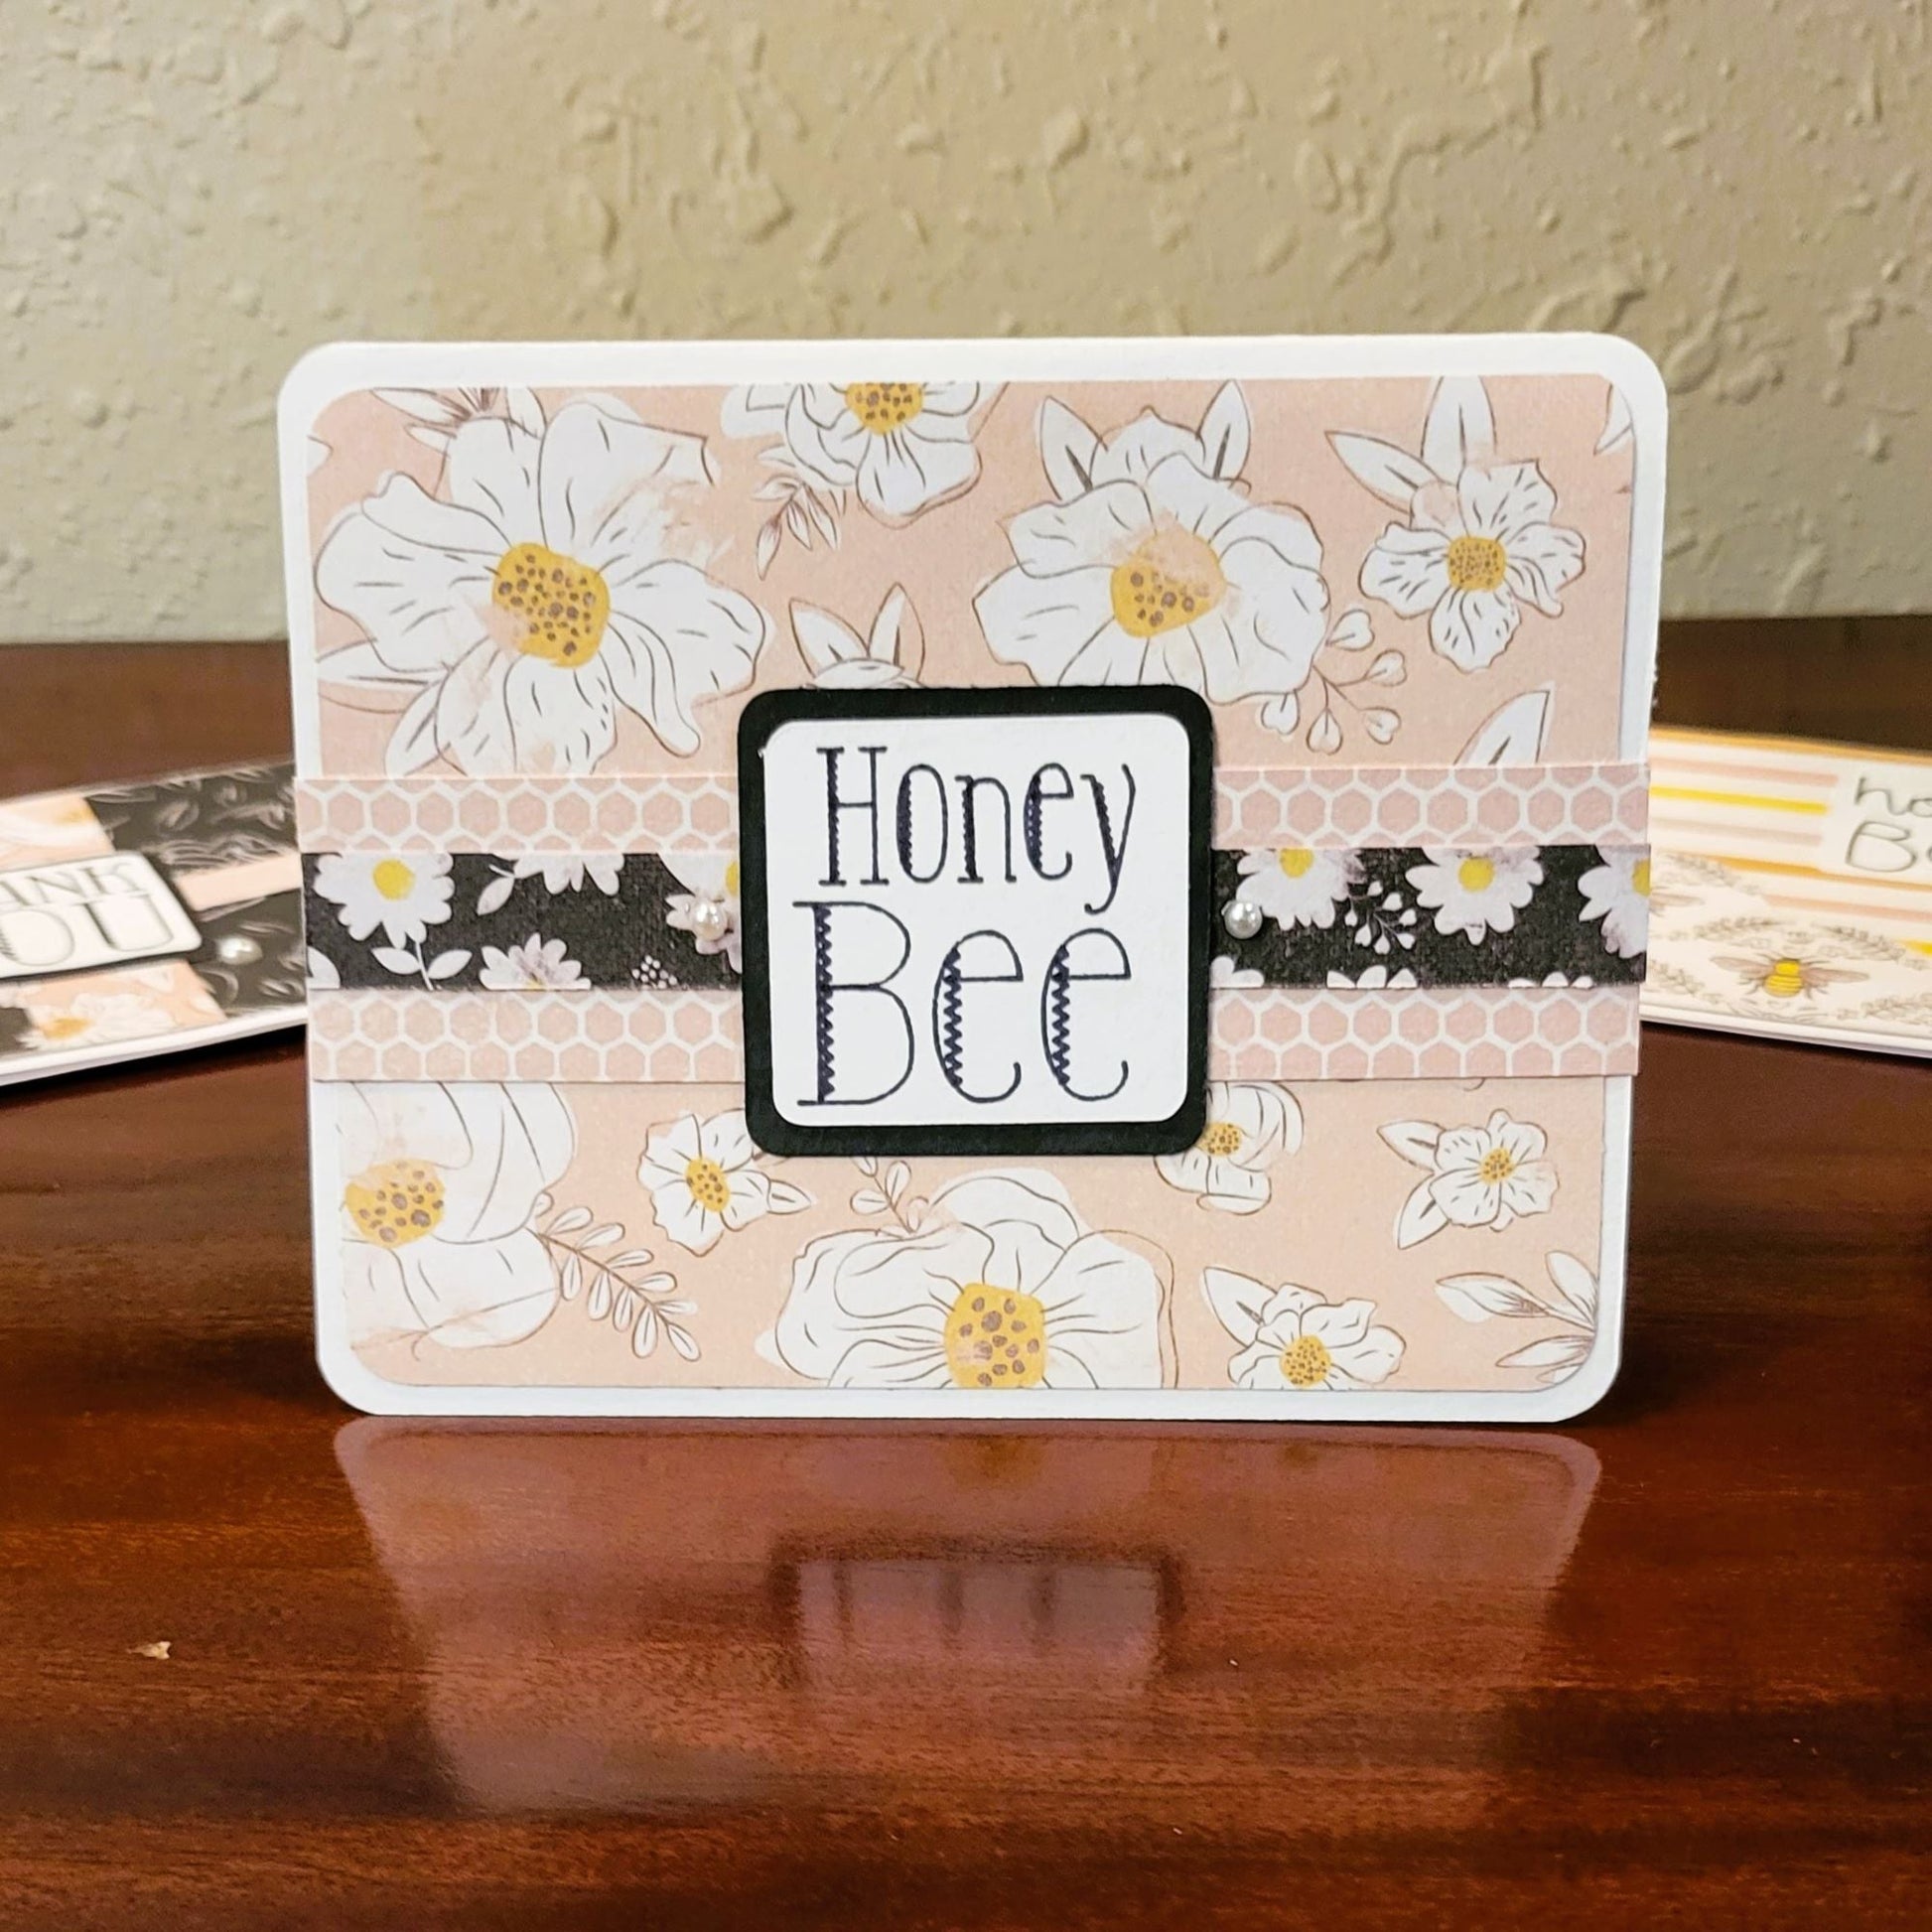 Honey Bee, Favorite Thing - Say Hello & Thank You - 31 Rubies Designs